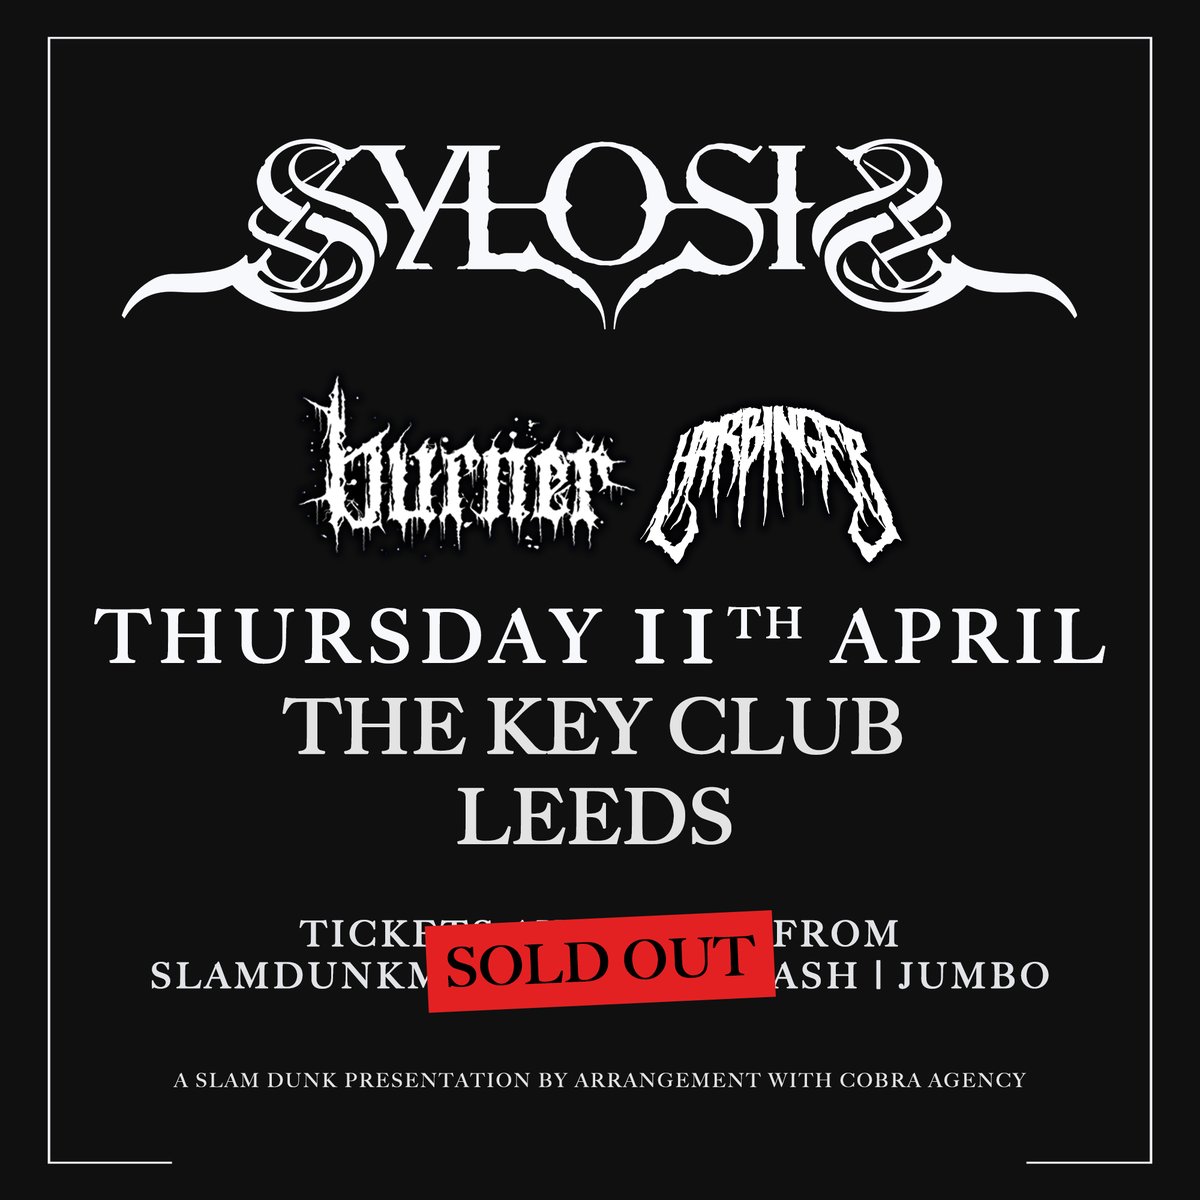 Tonight's sold out show at @thekeyclubleeds! Times: Doors 7pm @harbingerriffs 7.25pm @burnermetal 8.10pm @Sylosis 9pm